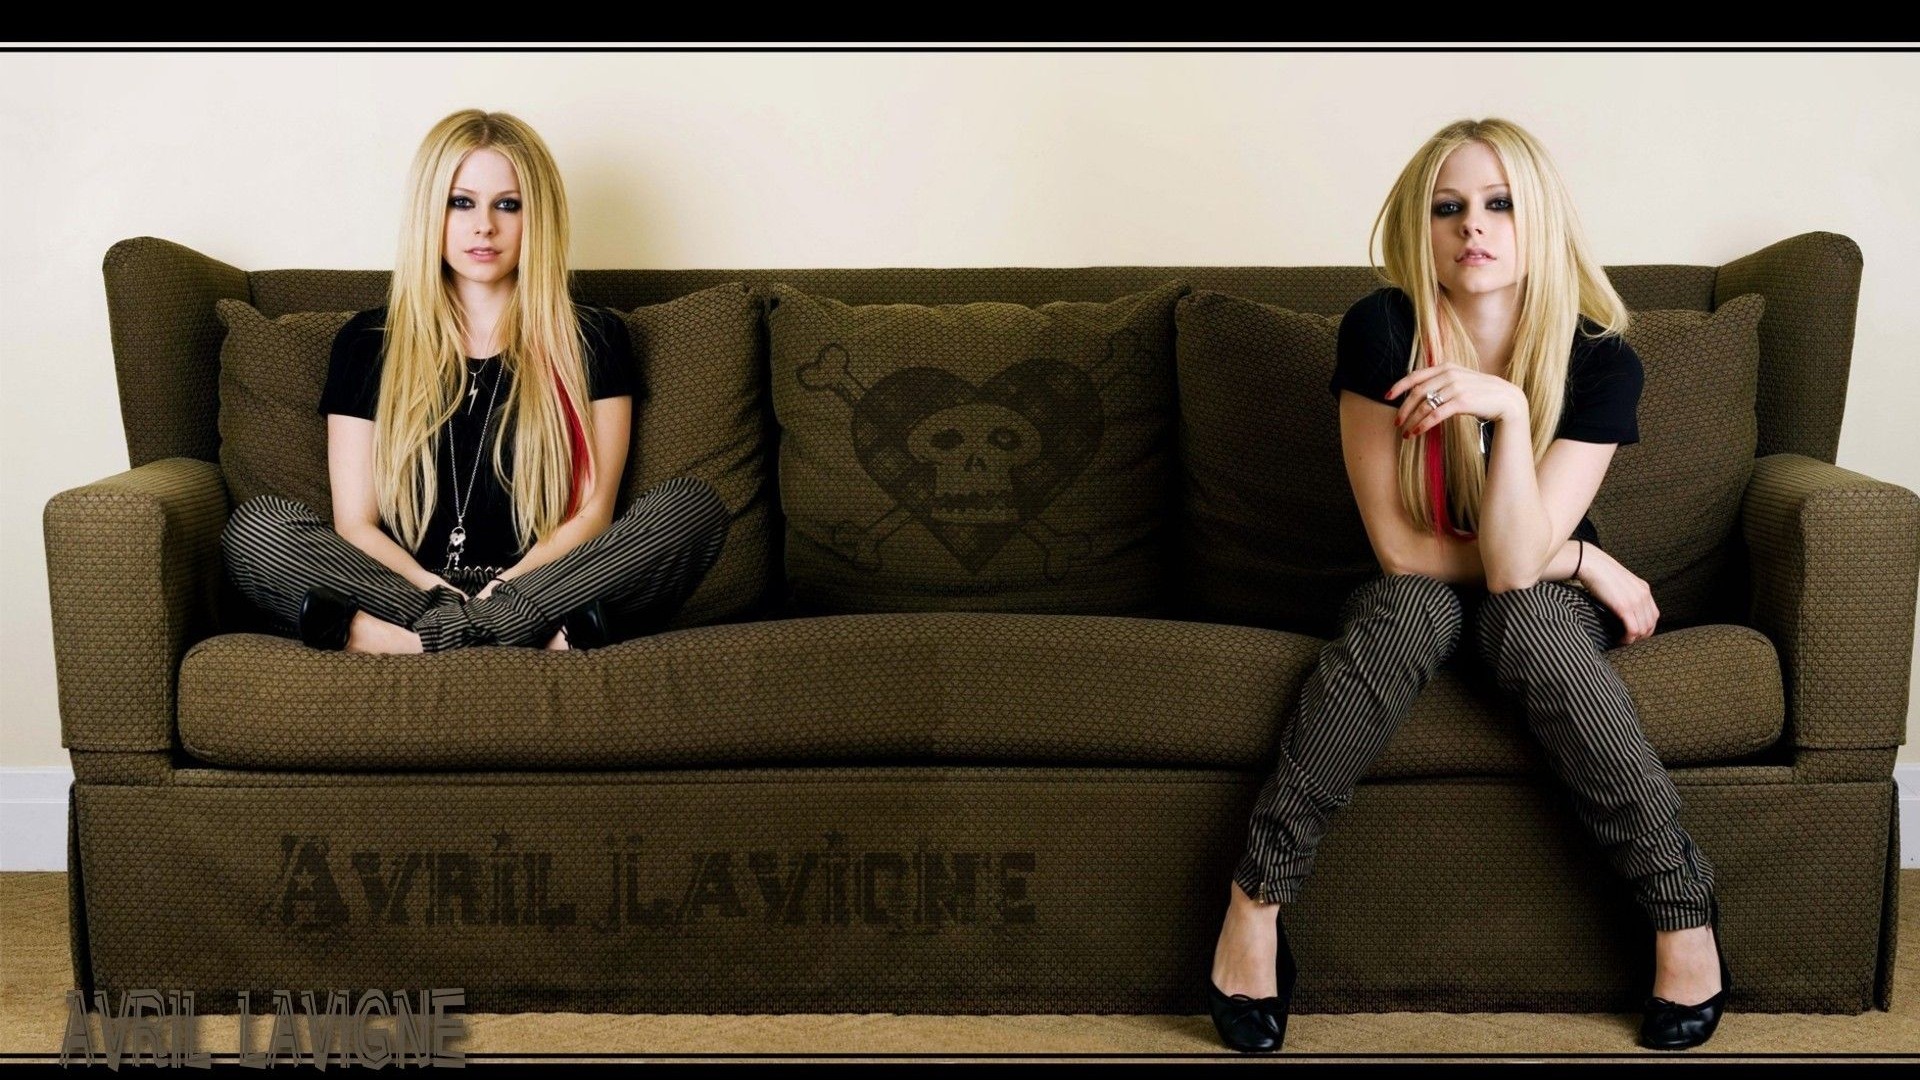 Avril Lavigne #078 - 1920x1080 Wallpapers Pictures Photos Images